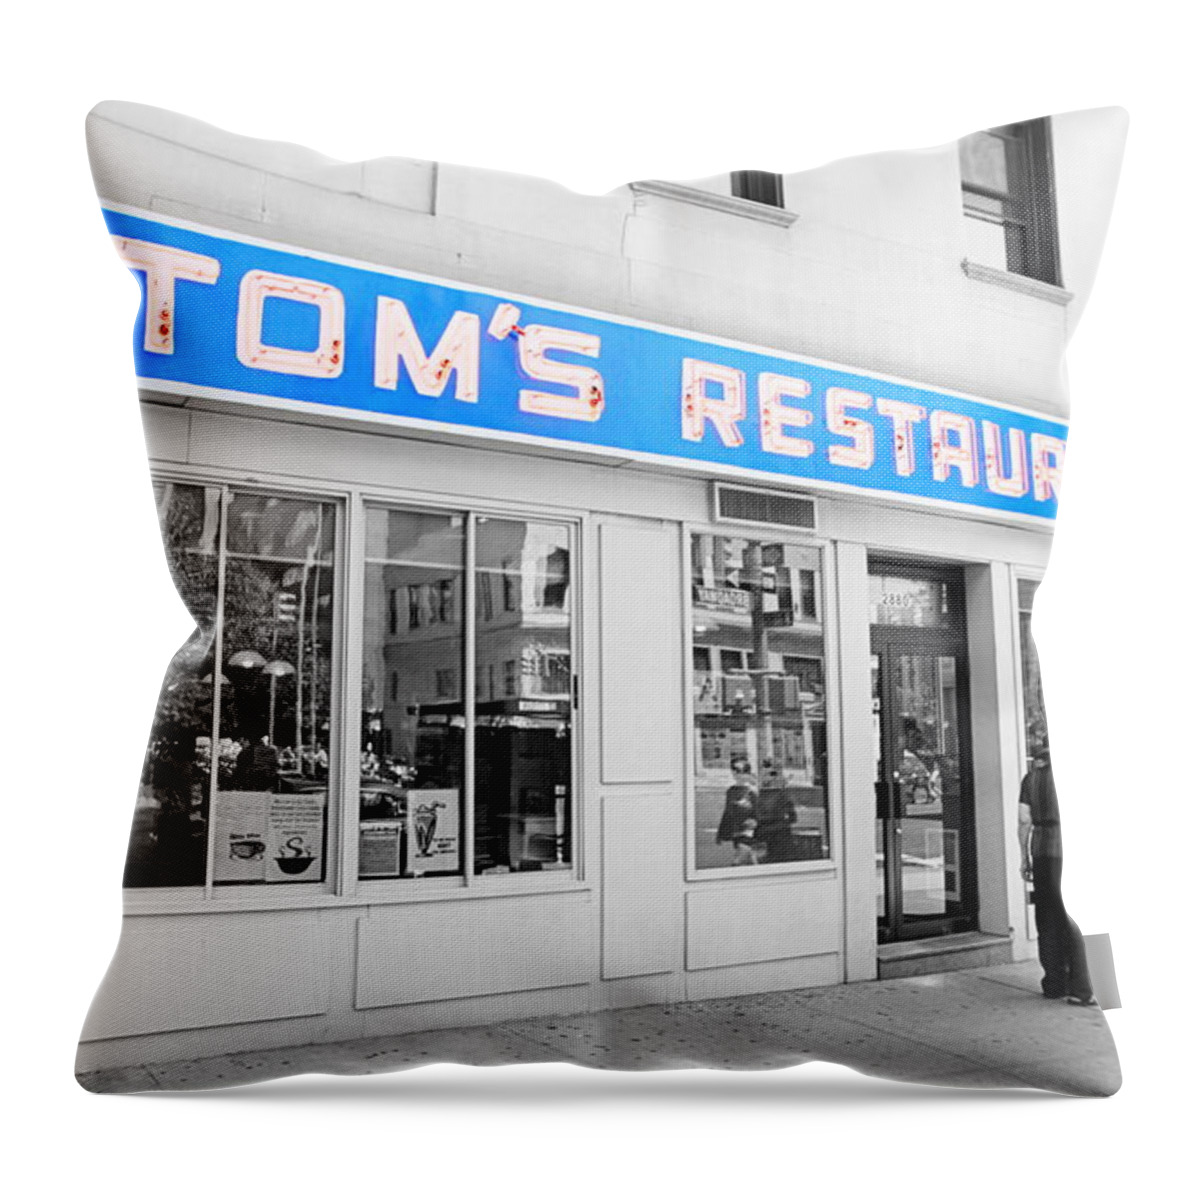 Seinfeld Throw Pillow featuring the photograph Seinfeld Diner Location #1 by Valentino Visentini